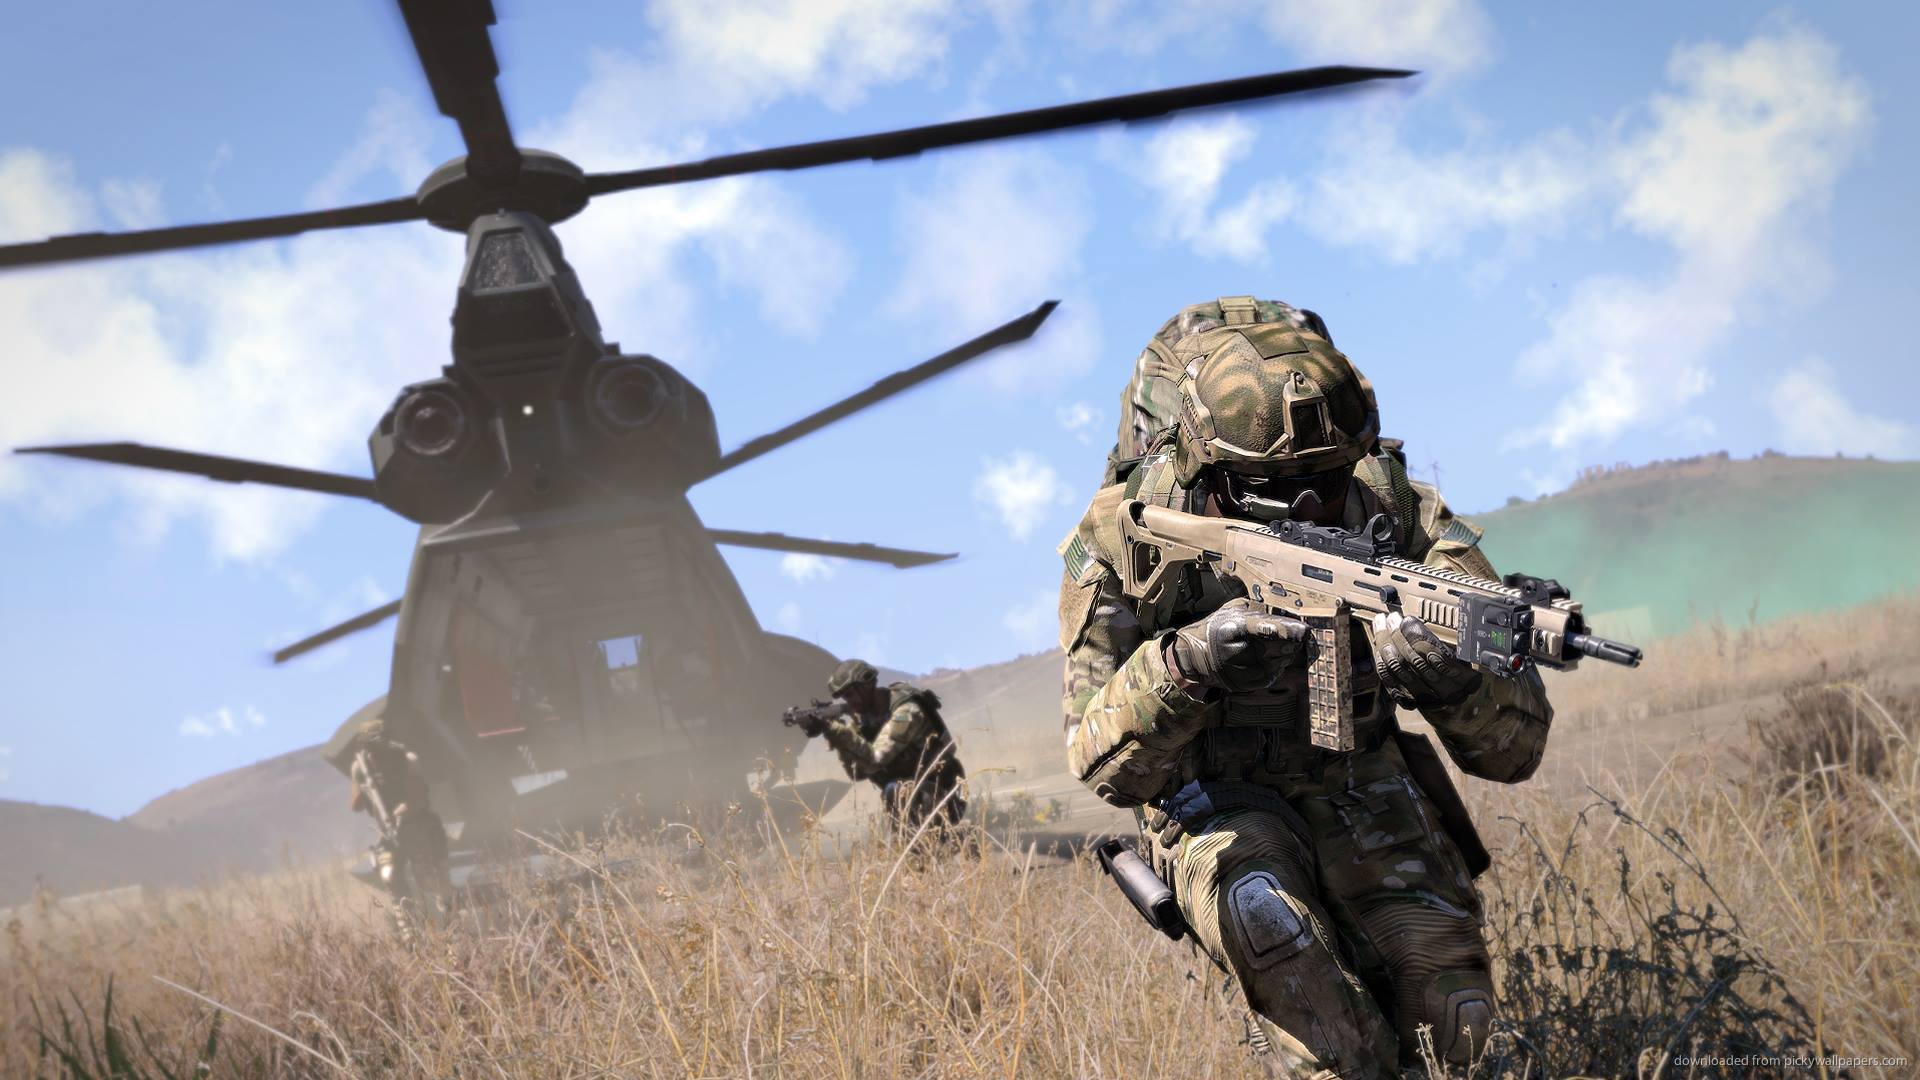 Arma 3 Video Game Wallpaper For IPhone 3G 3GS